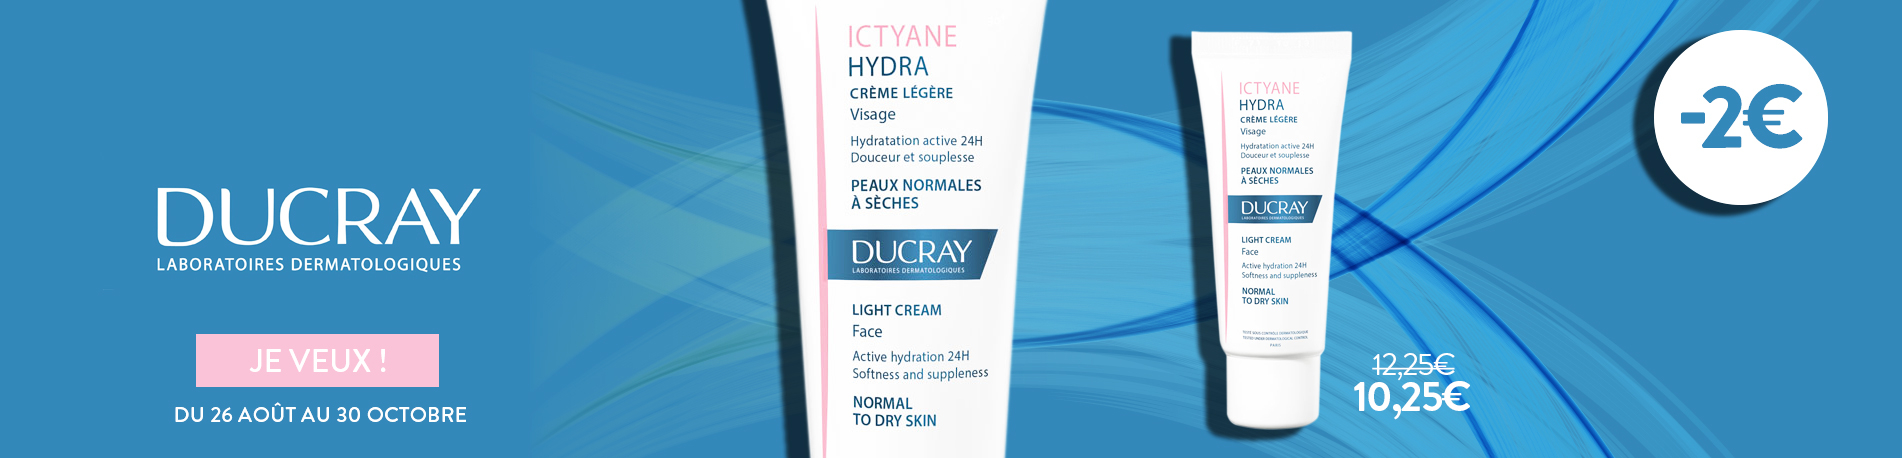 Promotion Ducray Ictyane hydra